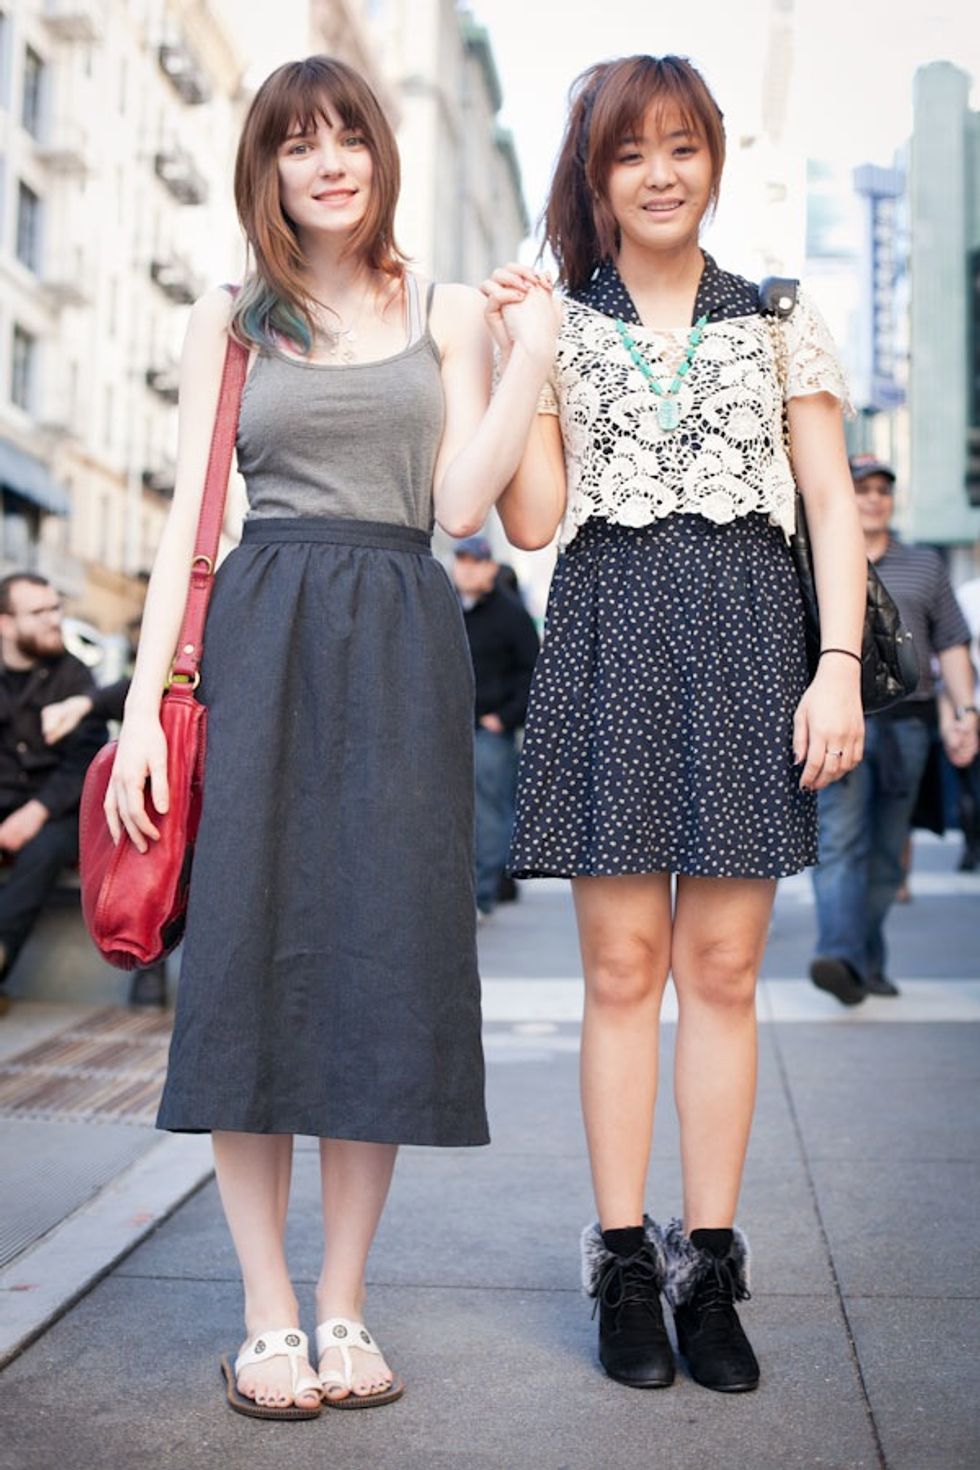 SF Street Style: Best Friends with Distinctly Different Styles in Union Square